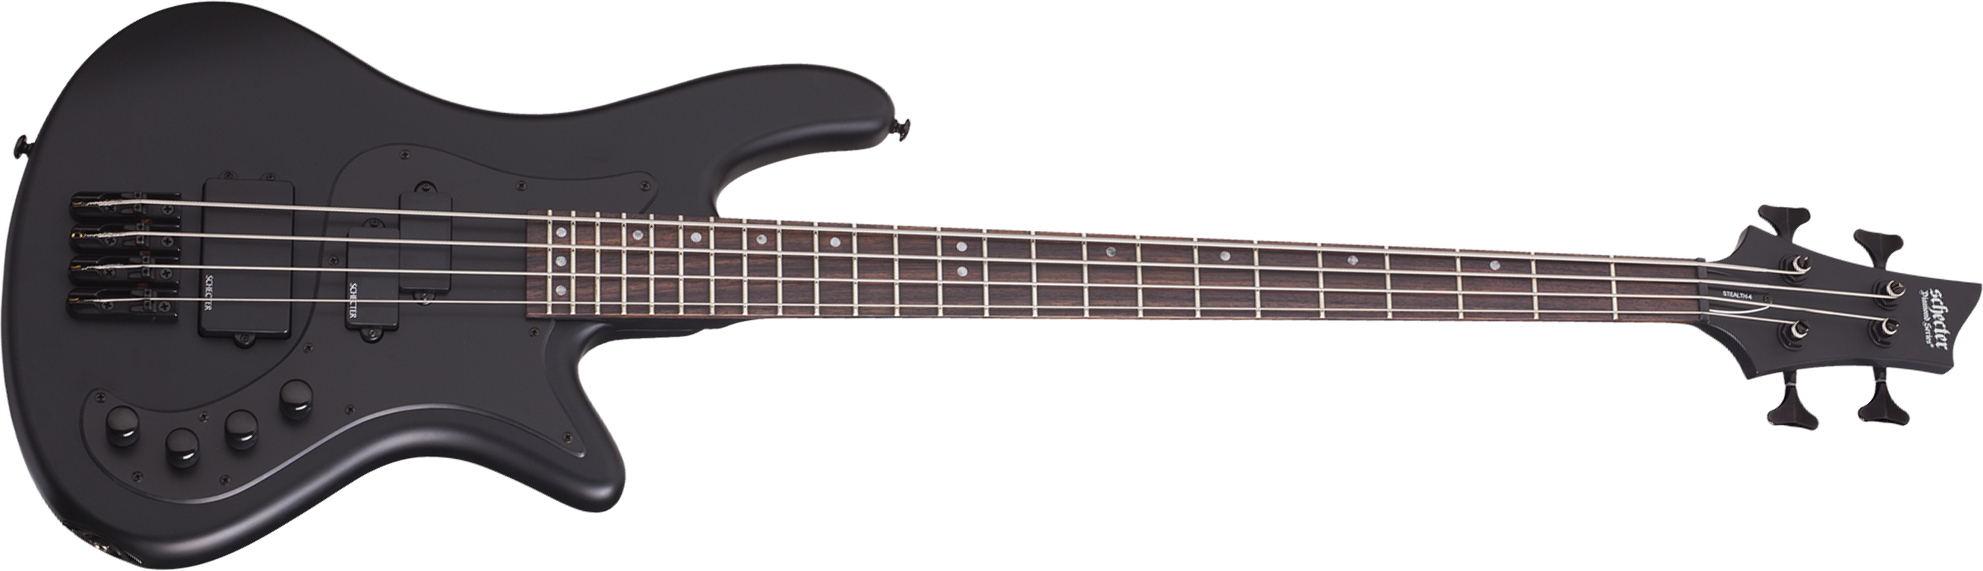 Schecter Stiletto Stealth 4c Active Rw - Satin Black - Solid body electric bass - Main picture